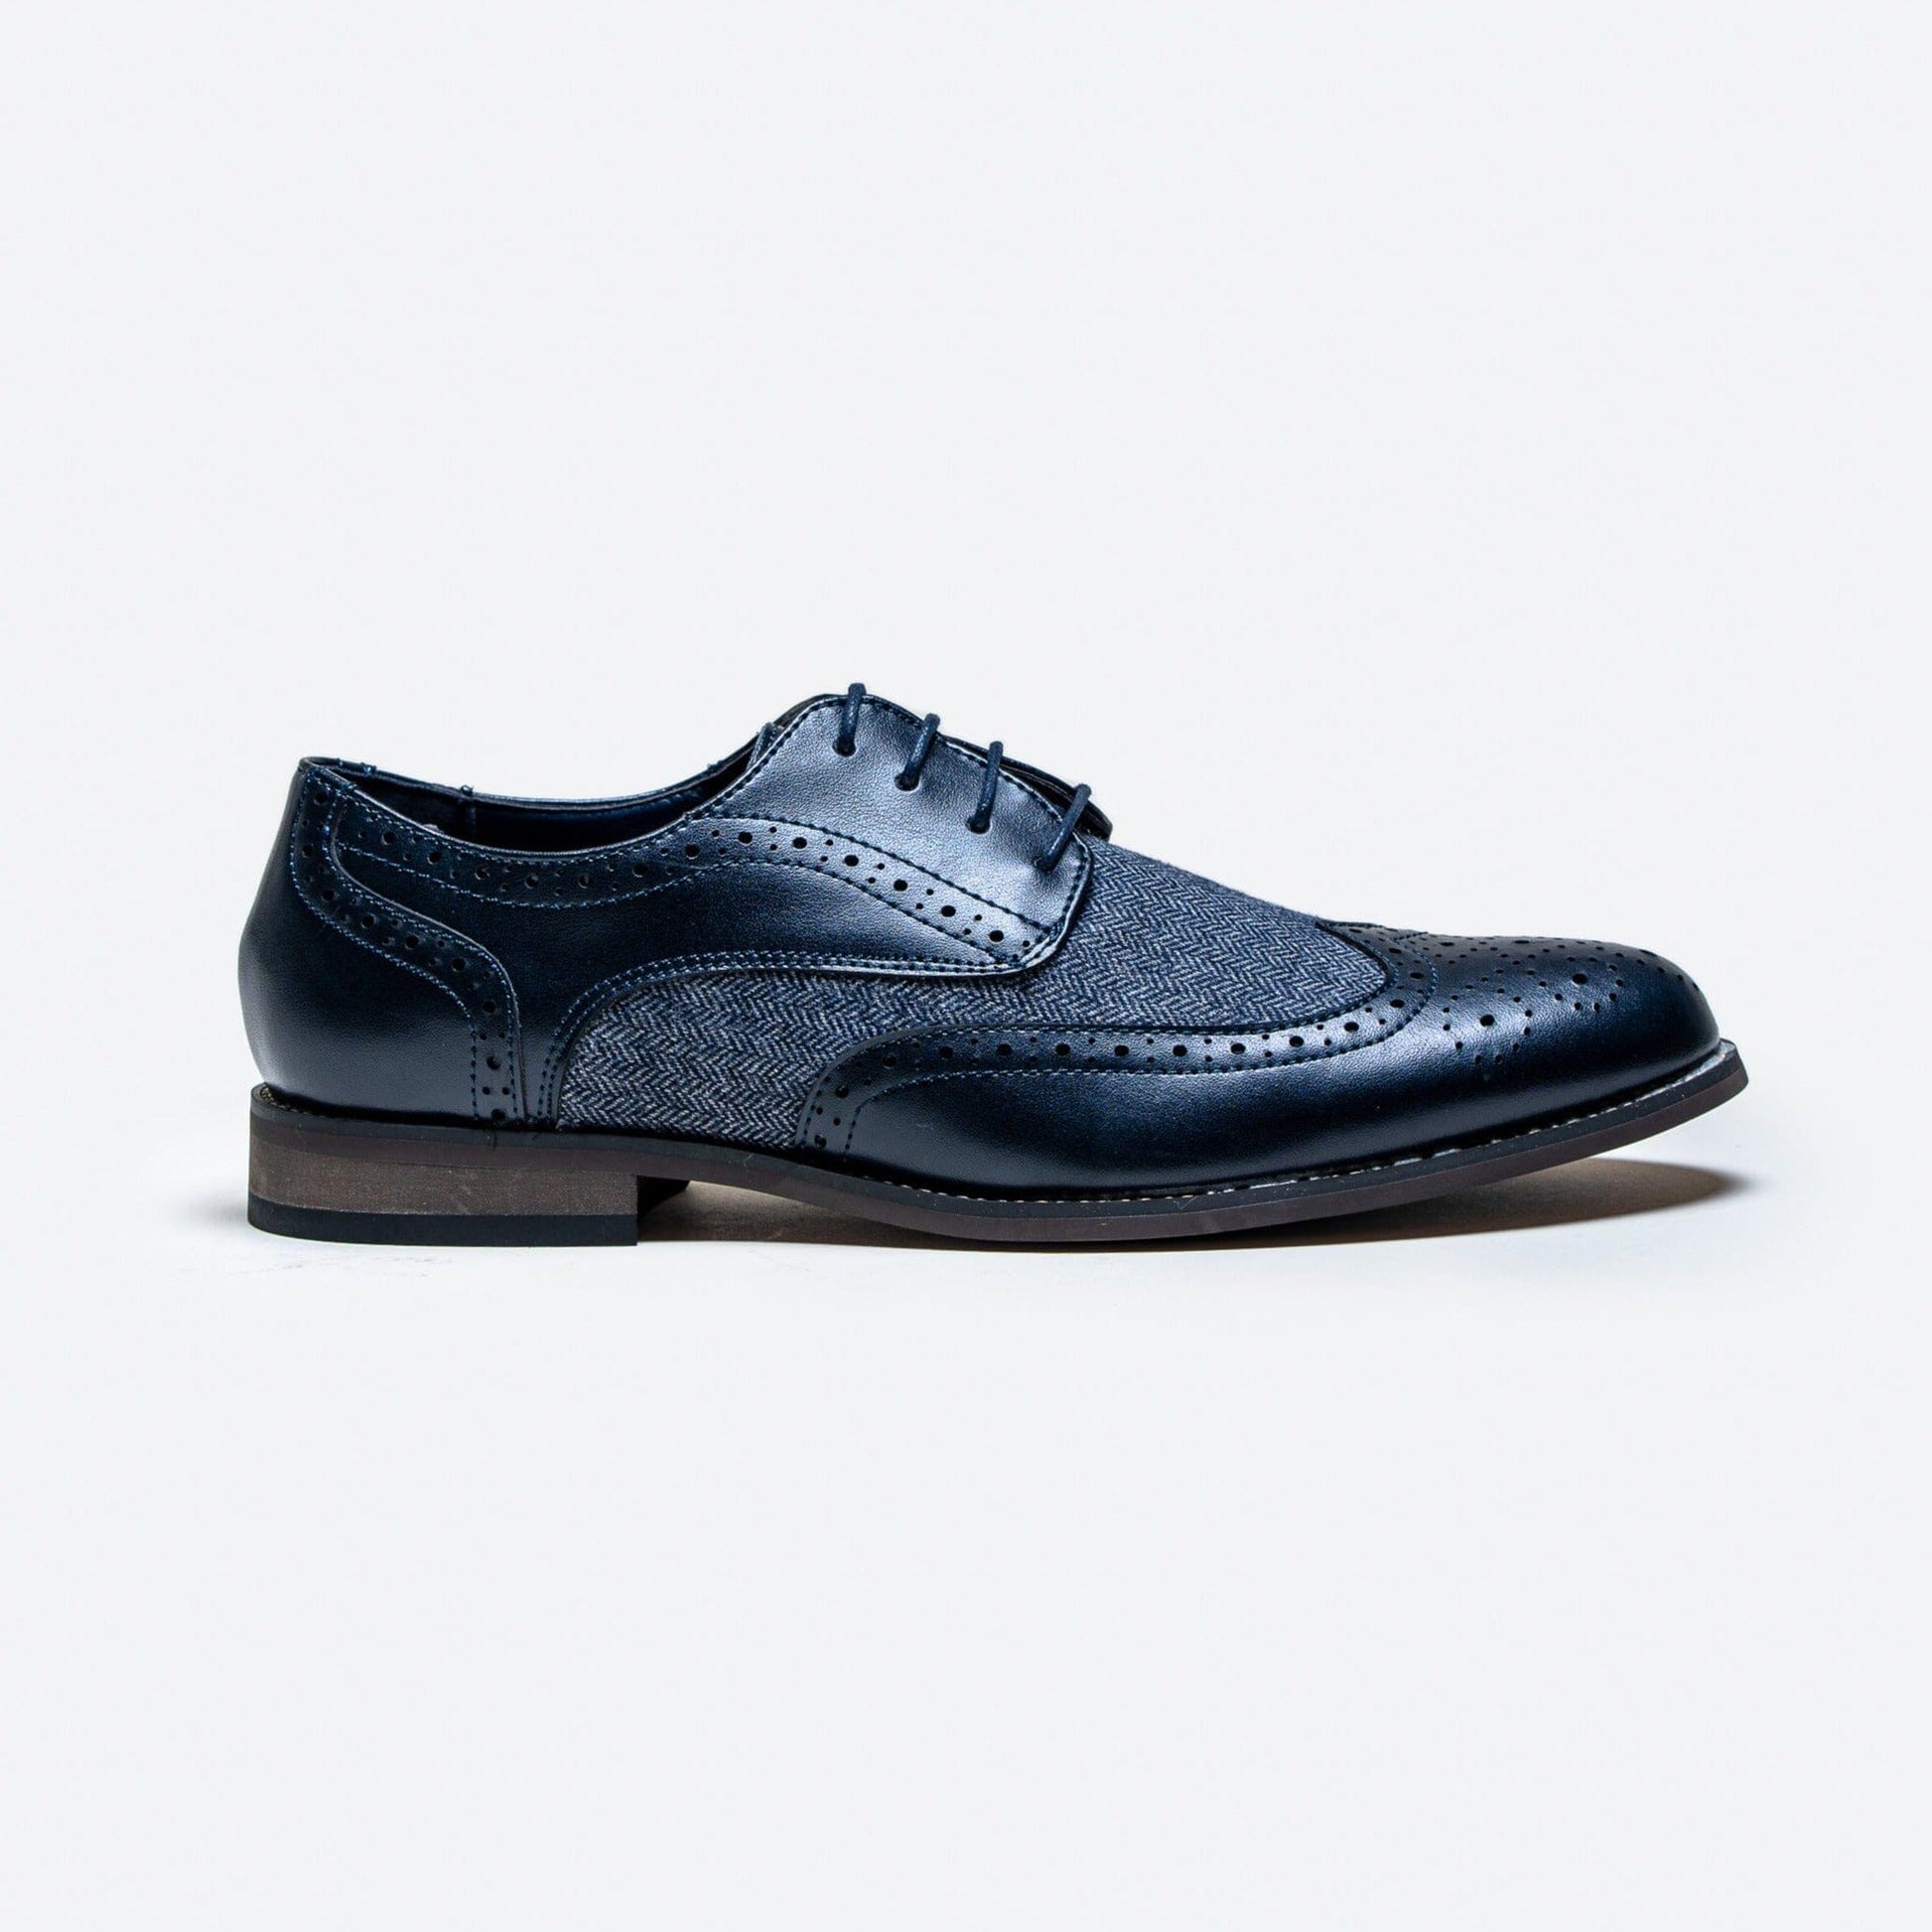 Oliver Navy Tweed Shoes - Shoes - 7 - THREADPEPPER